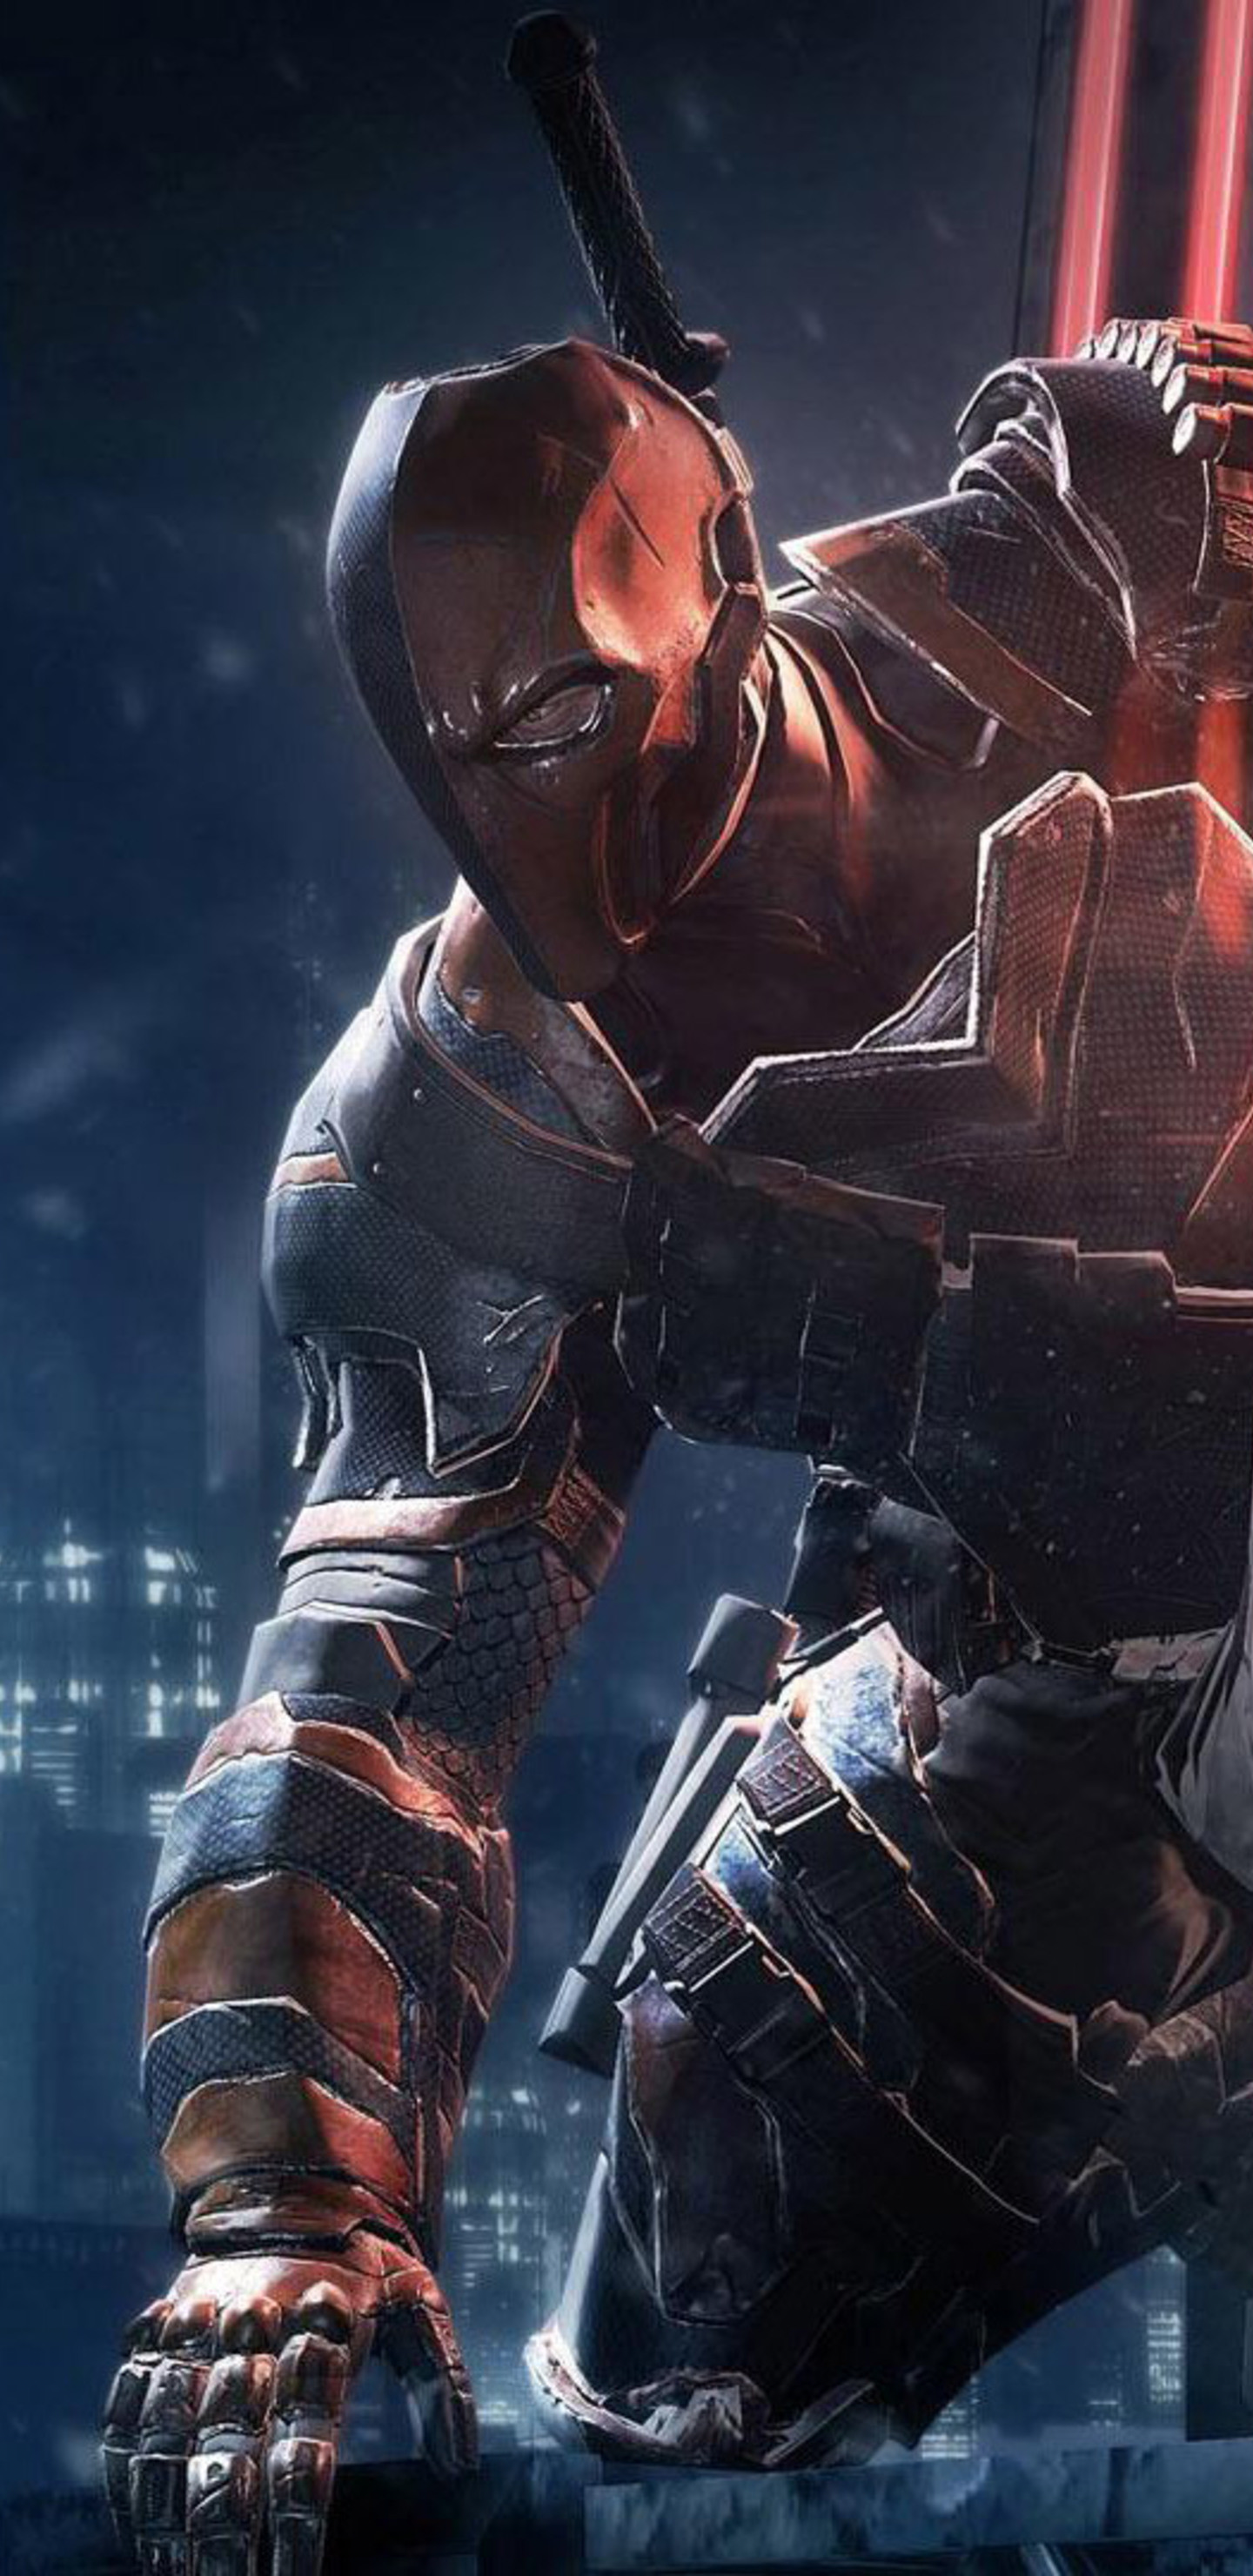 deathstroke wallpaper,action adventure game,fictional character,action film,superhero,movie